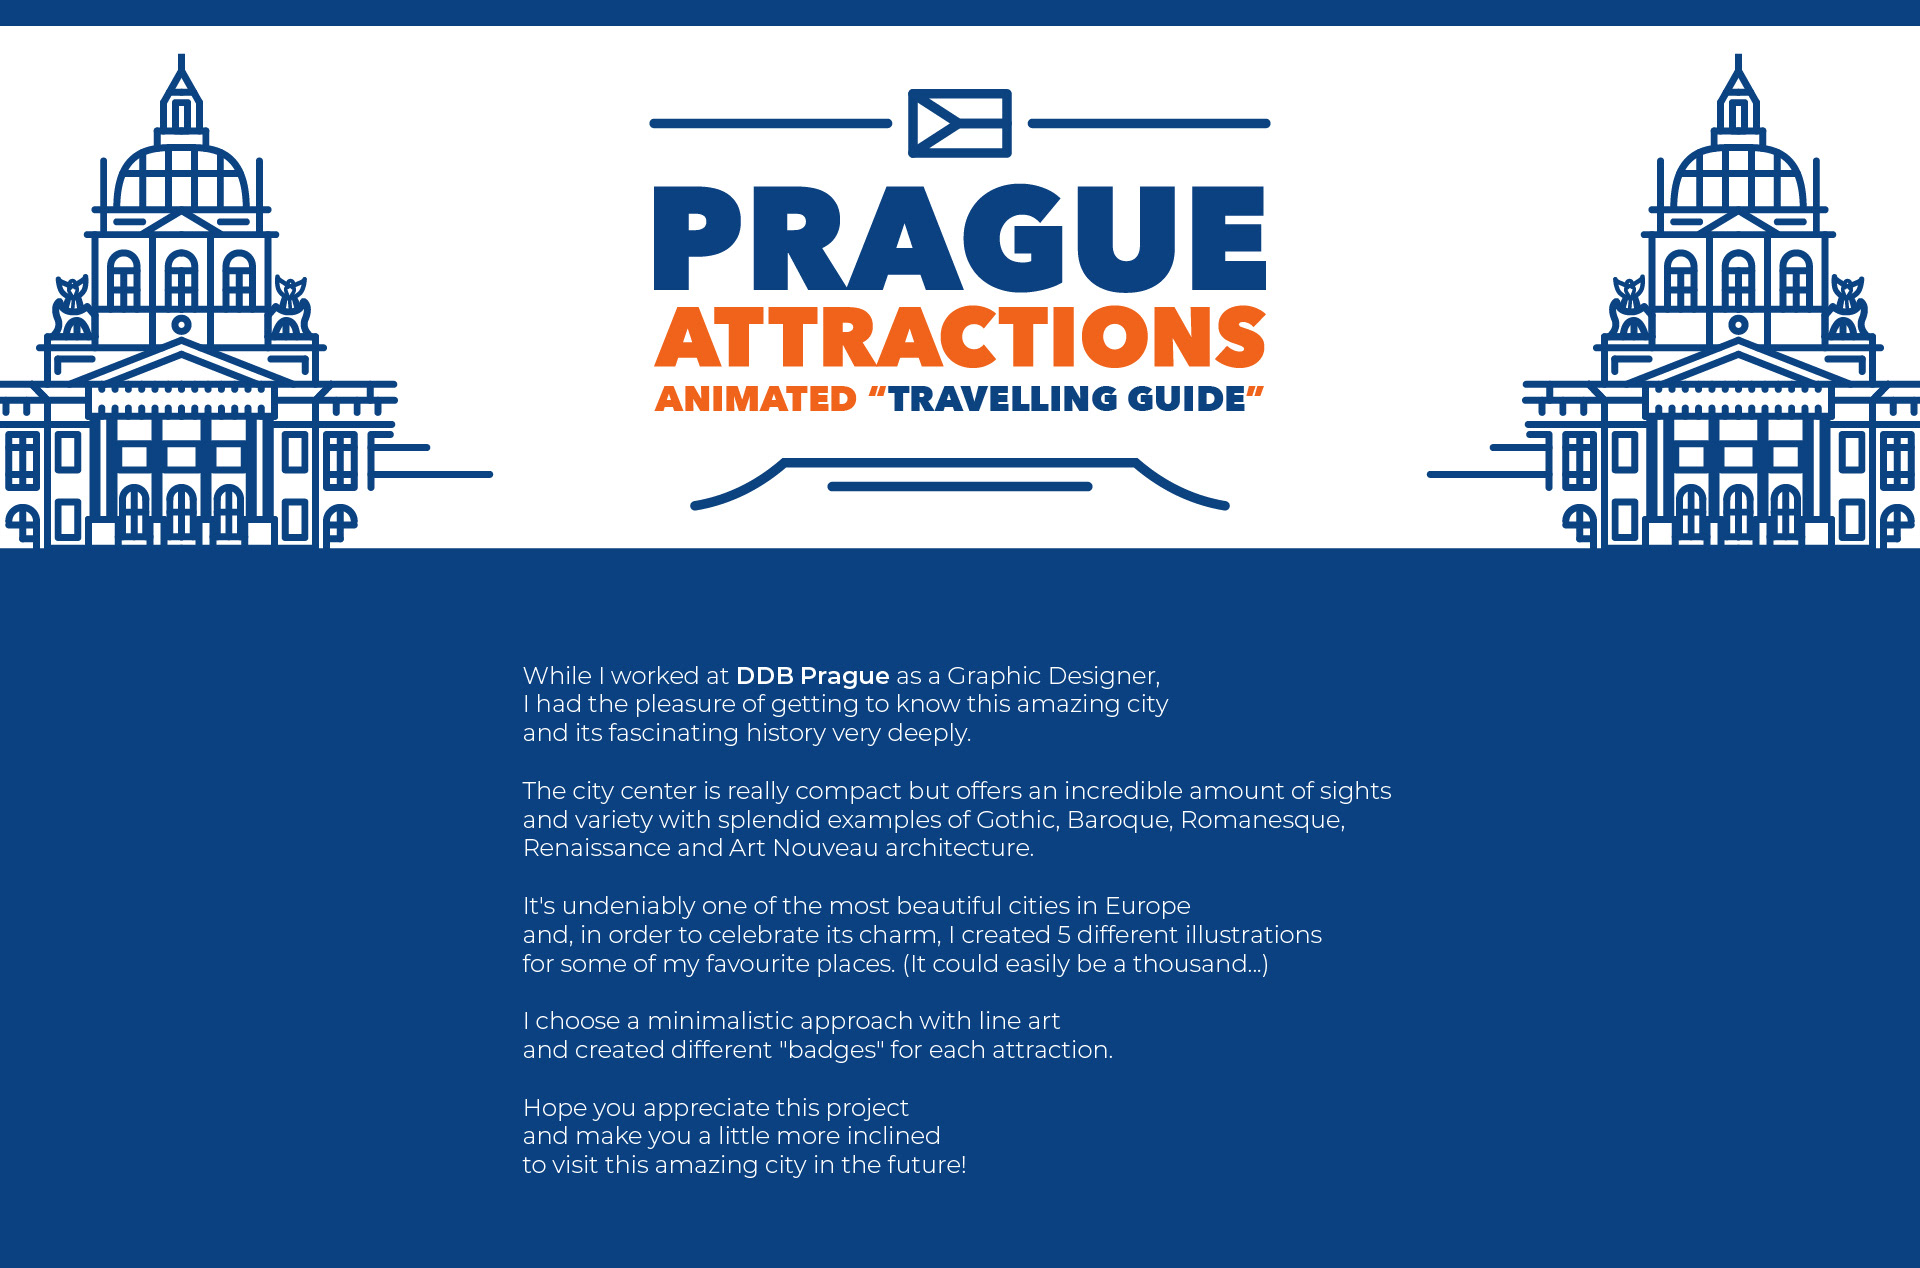 Prague Attractions Project